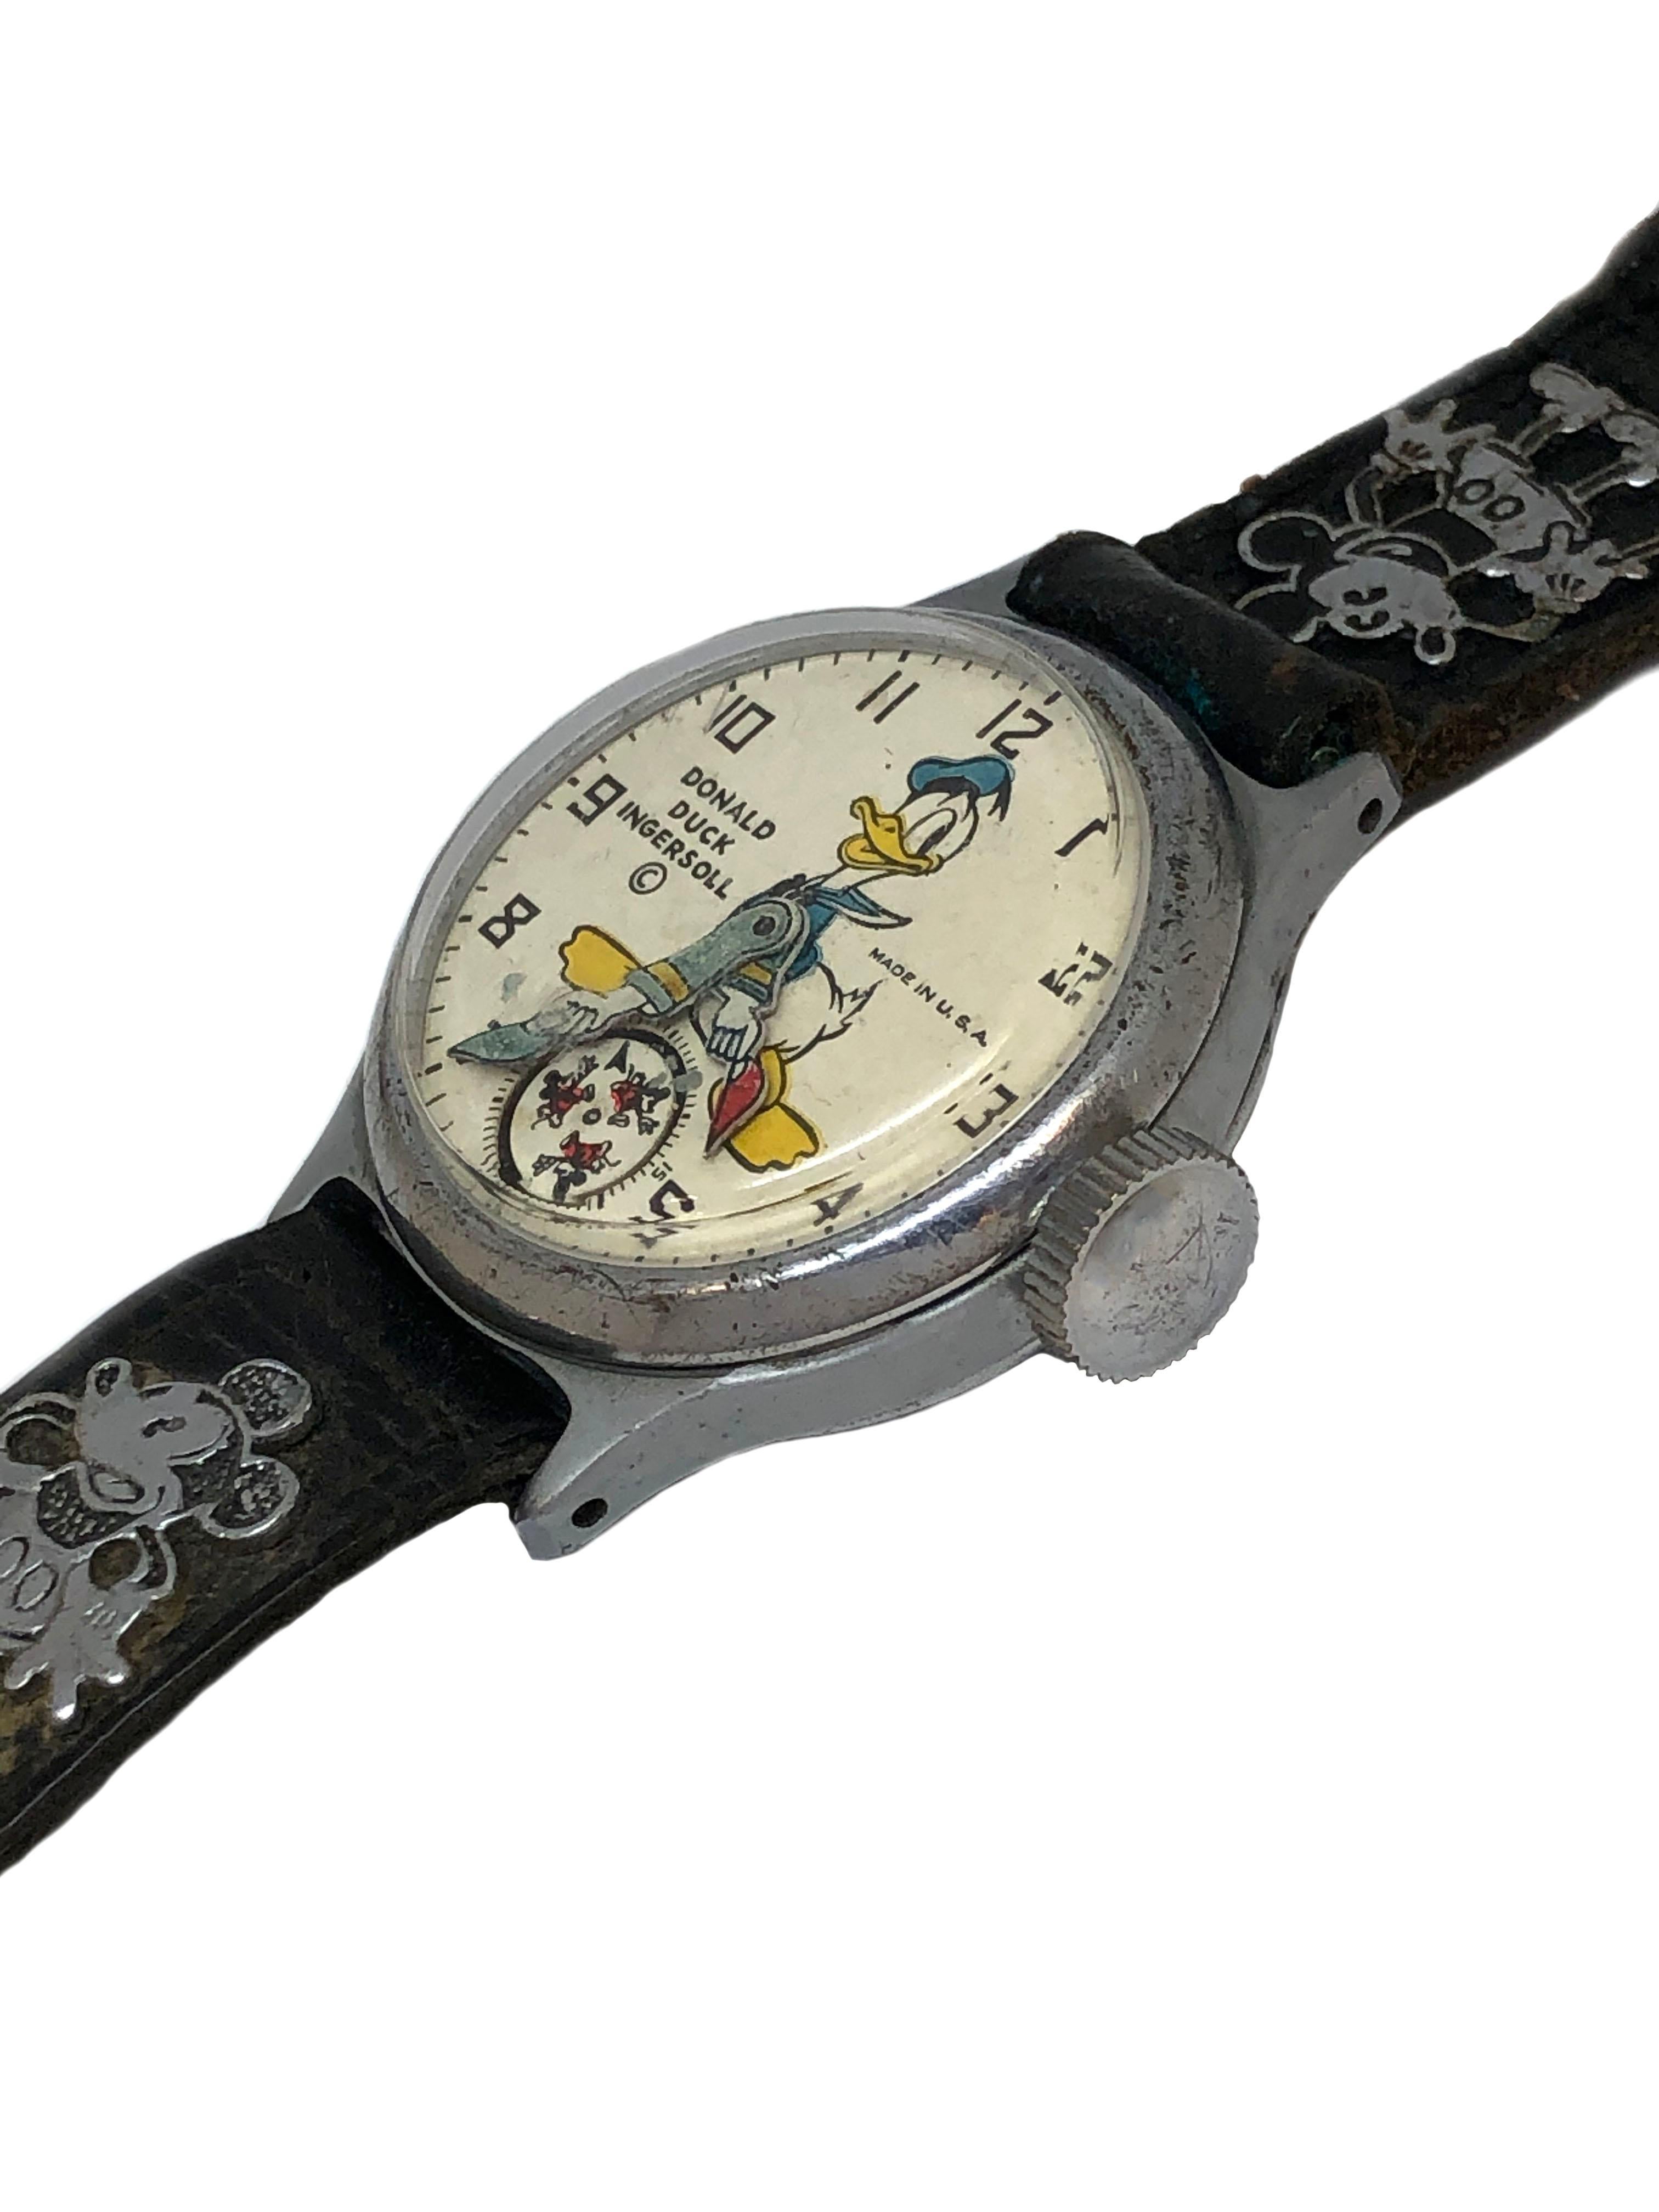 Circa 1935 Ingersoll Donald Duck Wrist Watch, a very Rare and hard to find Watch that was produced in extremely small quantities as it was a poor seller compared to the more popular Mickey Mouse. 32 M.M. 3 Piece Chromium case and a Mechanical,